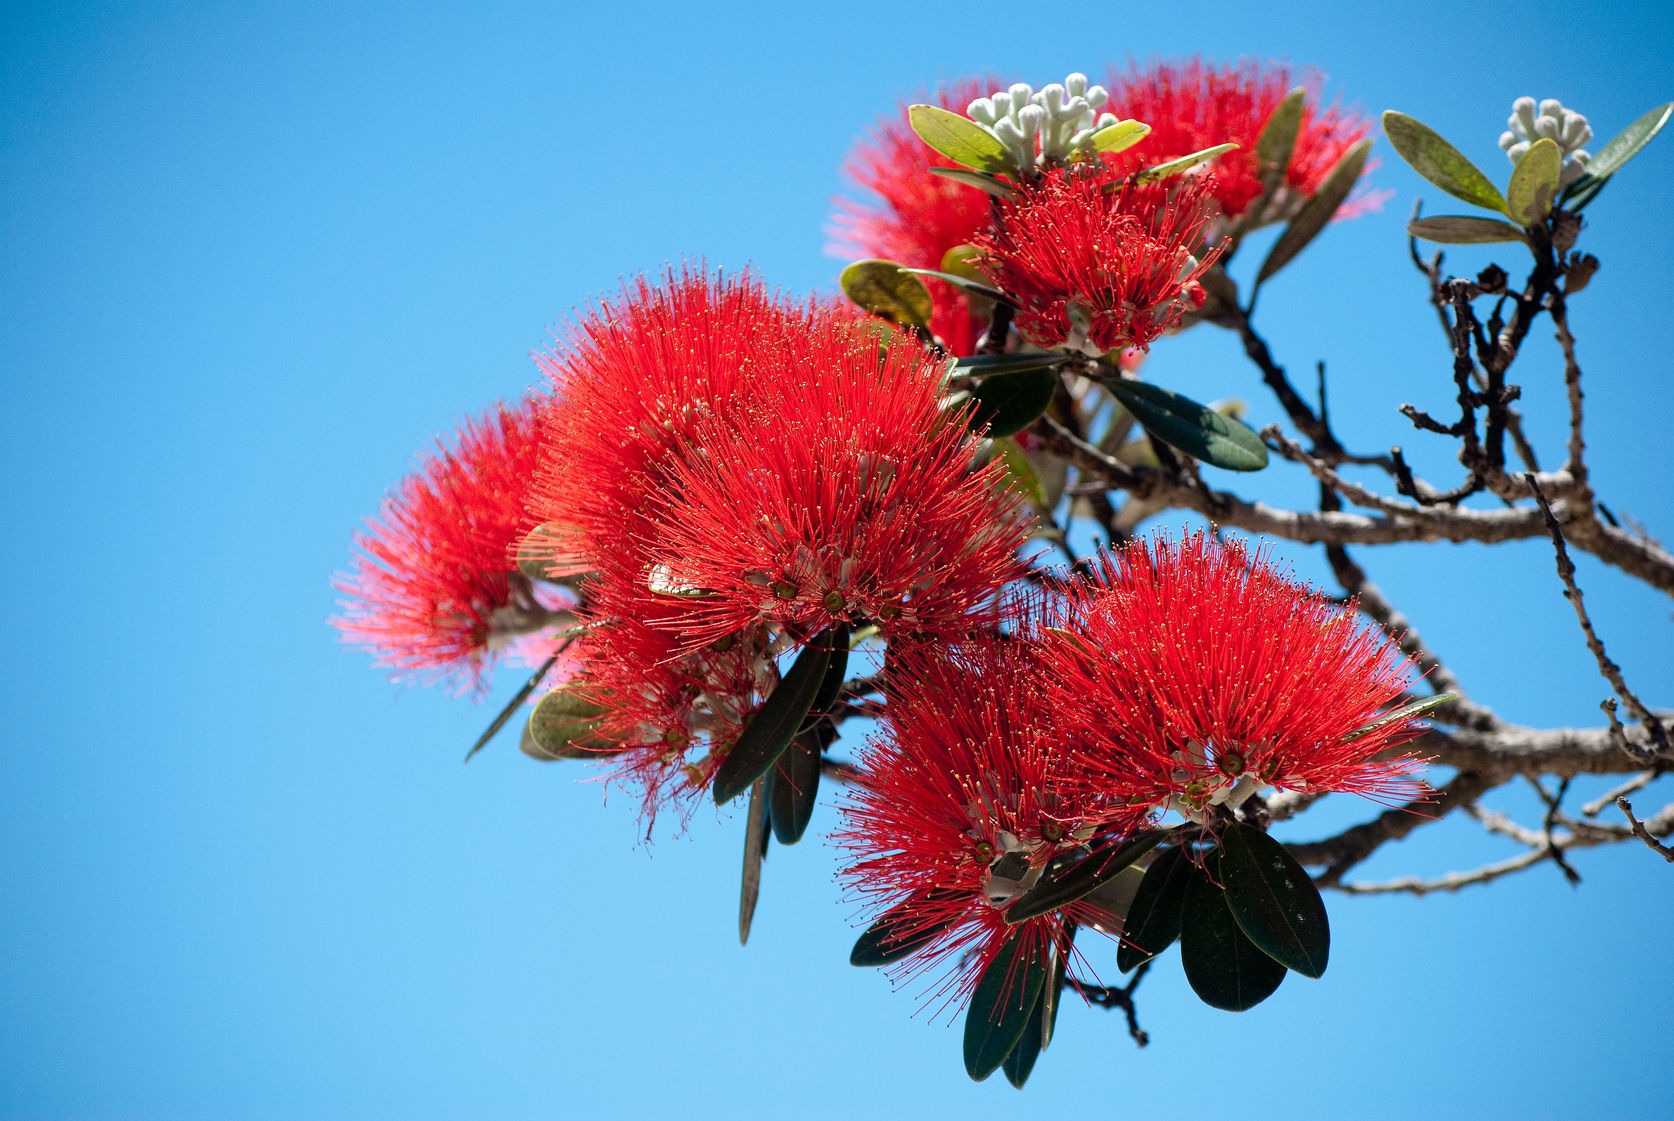 Image of red Pohutukawa flowers against a sky blue background